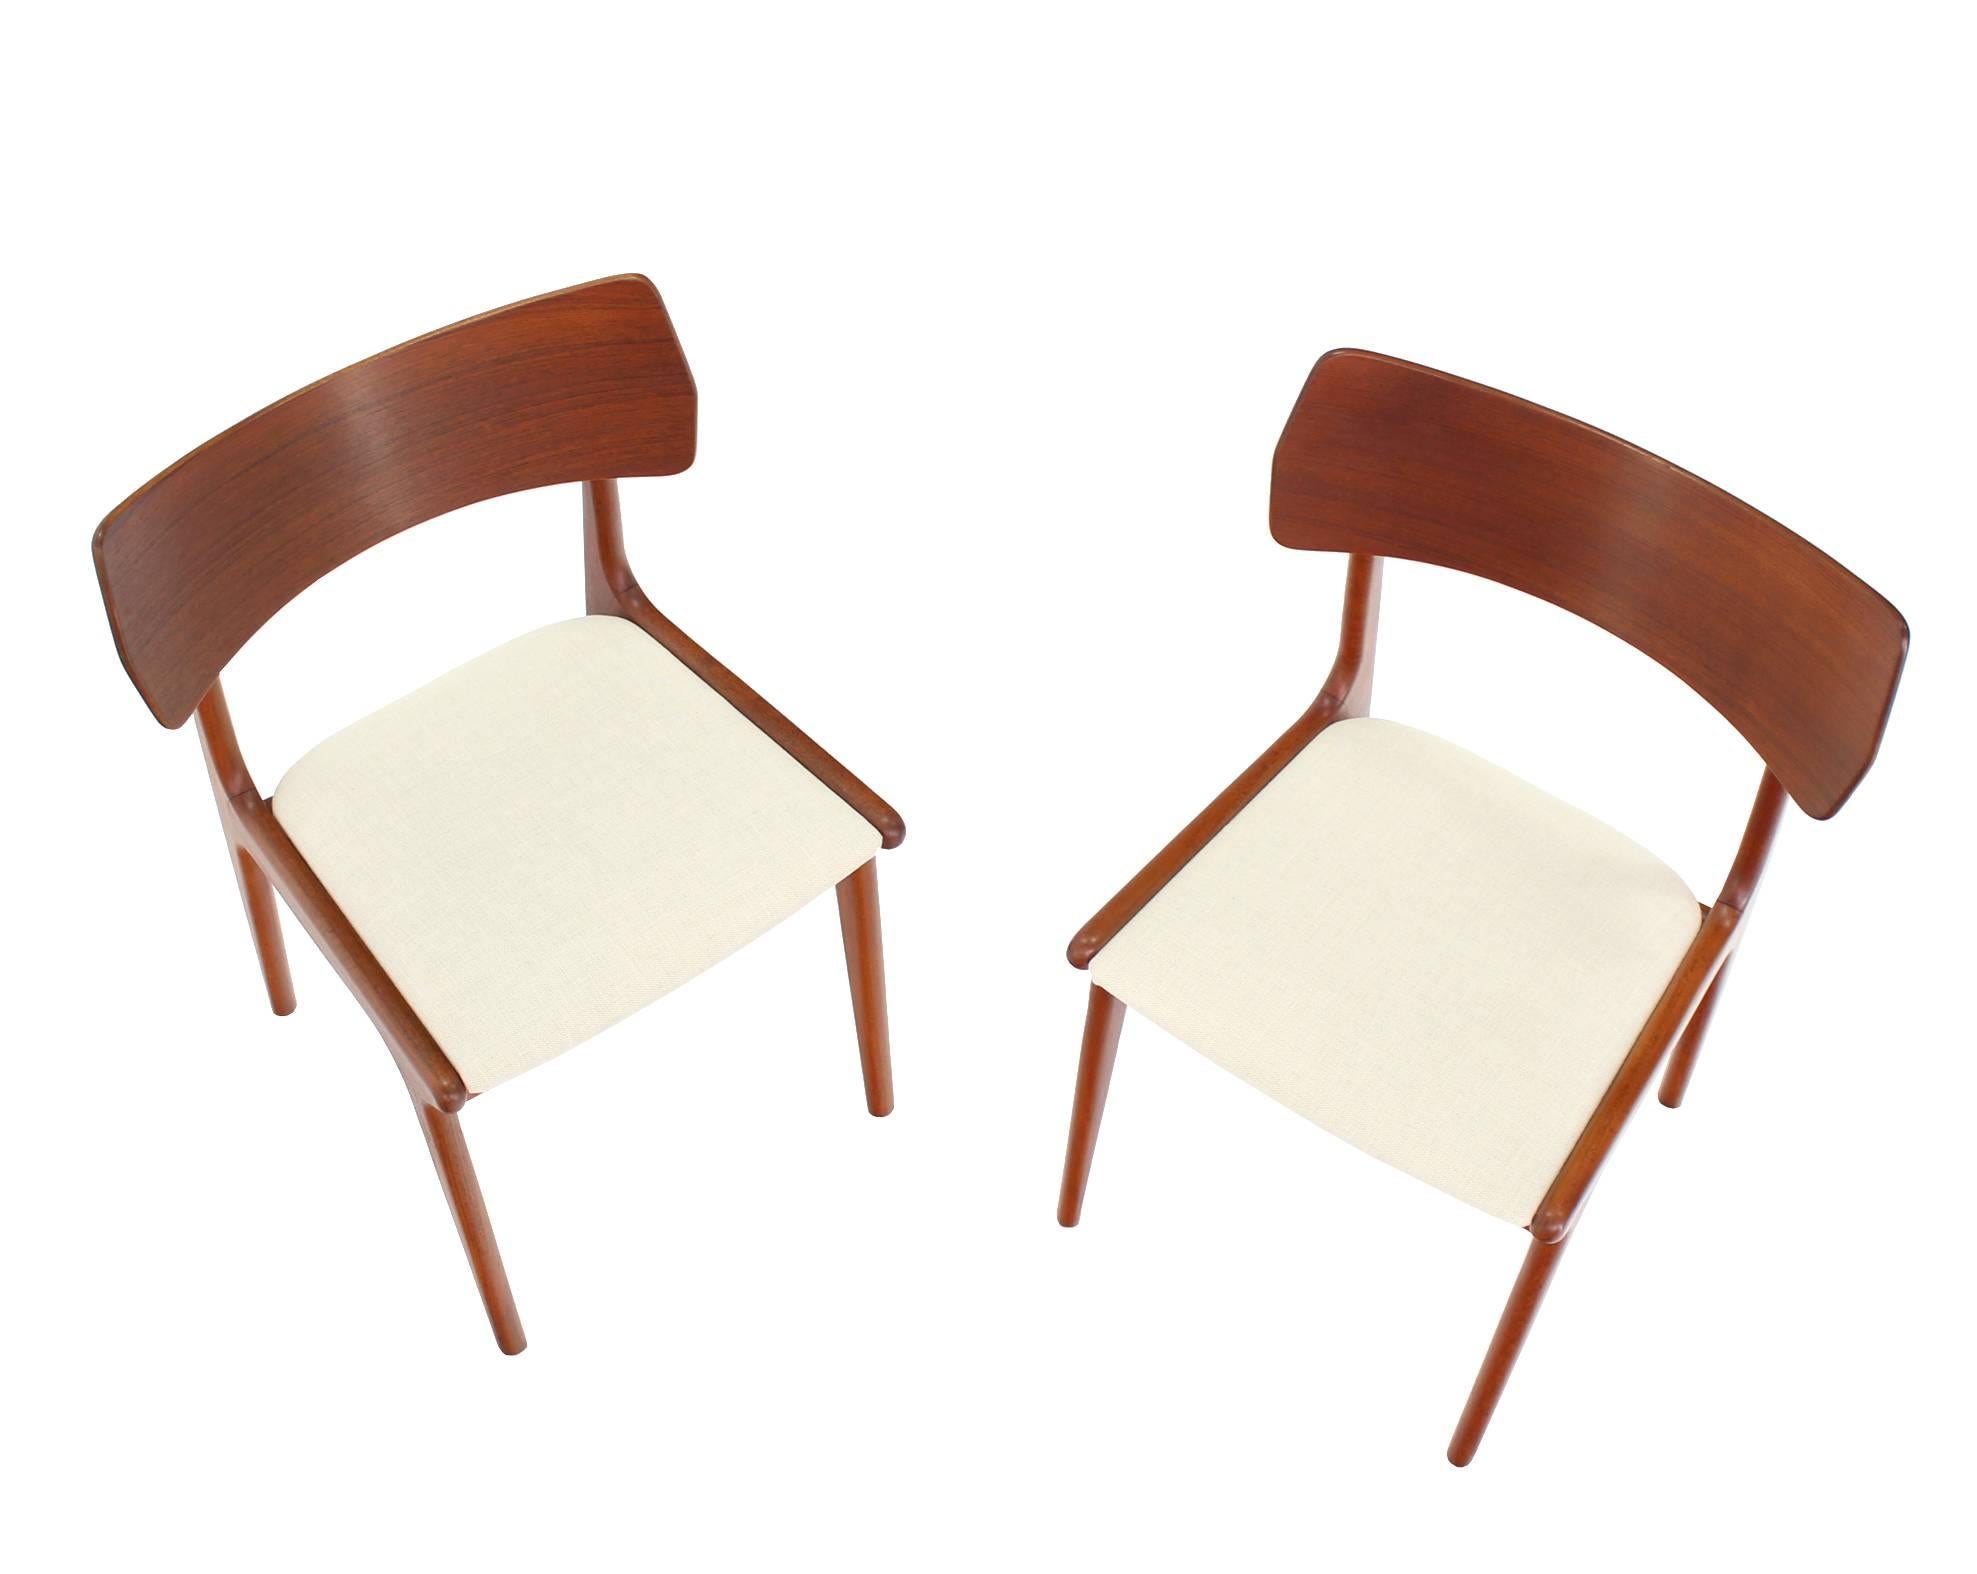 Set of Four Danish Mid Century Modern Teak  Dining Chairs In Excellent Condition For Sale In Rockaway, NJ